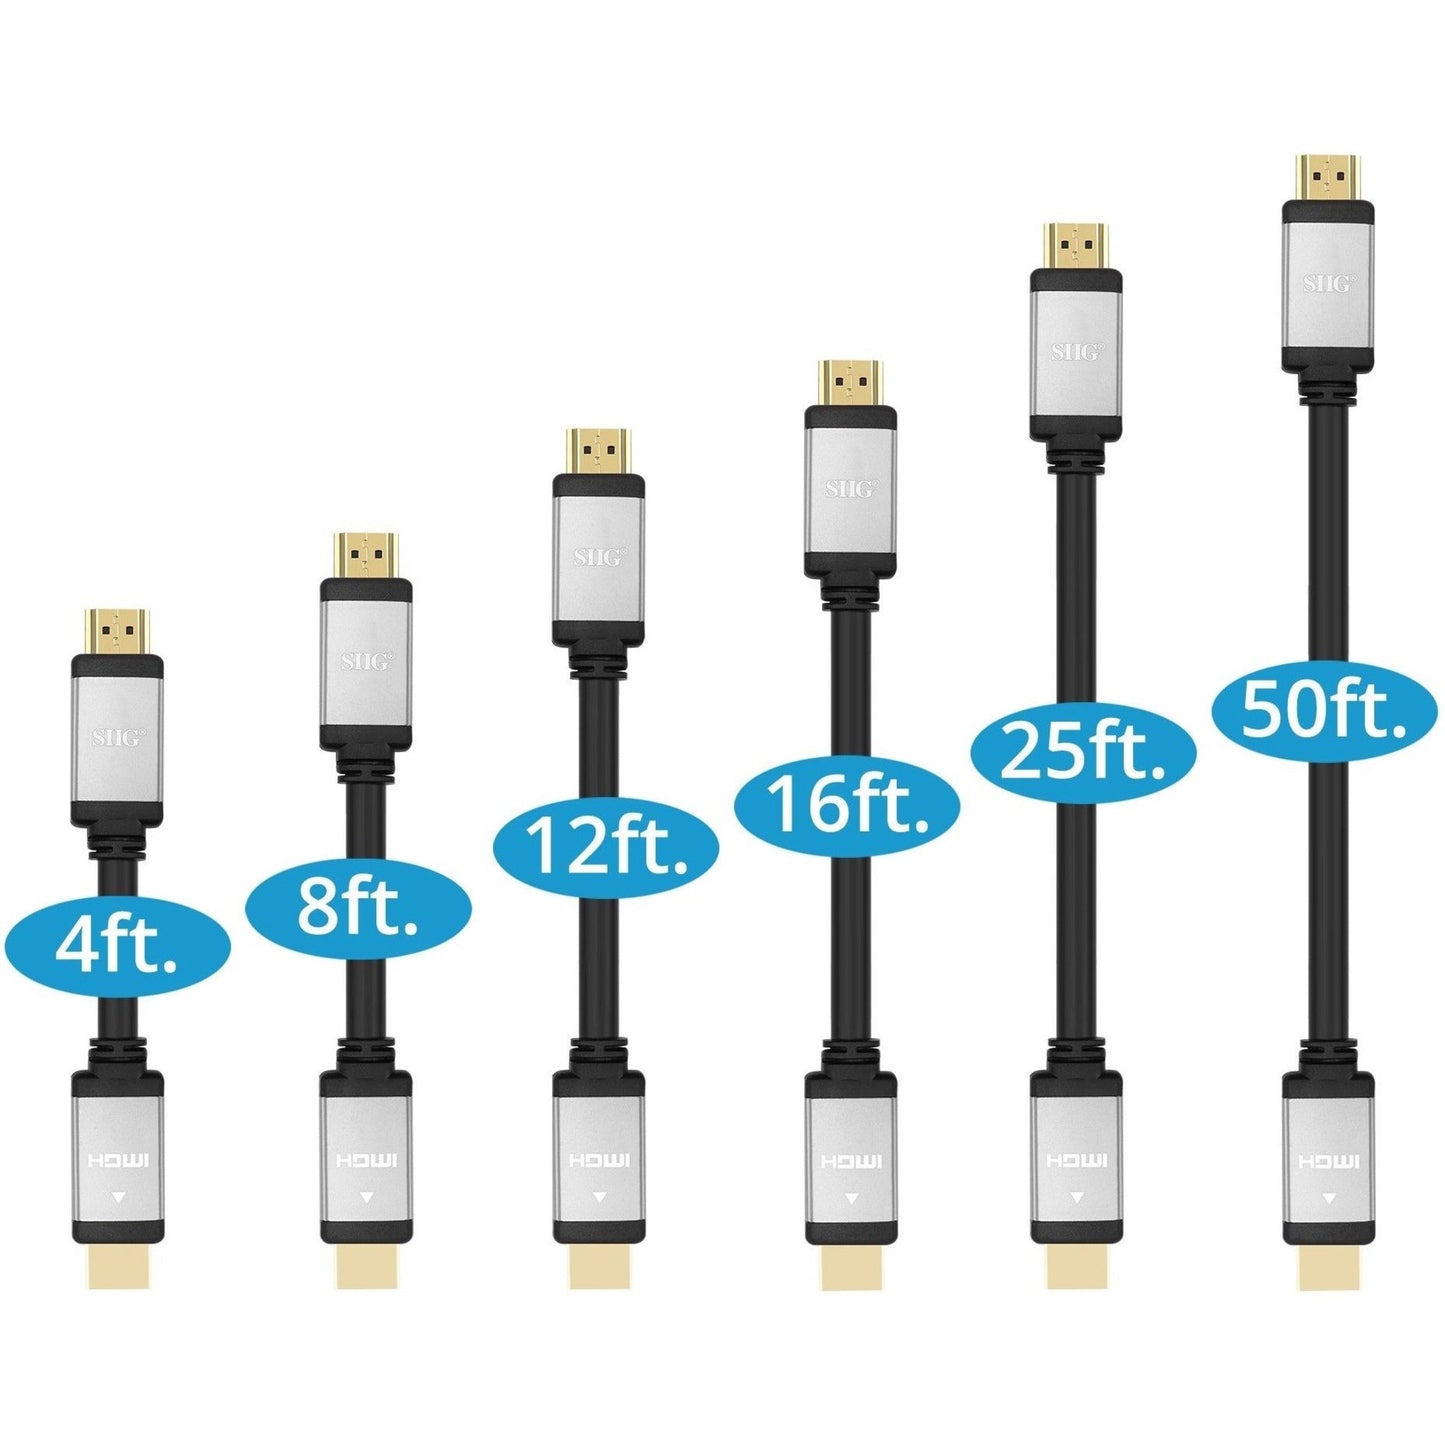 SIIG 4K High Speed HDMI Cable - 8ft